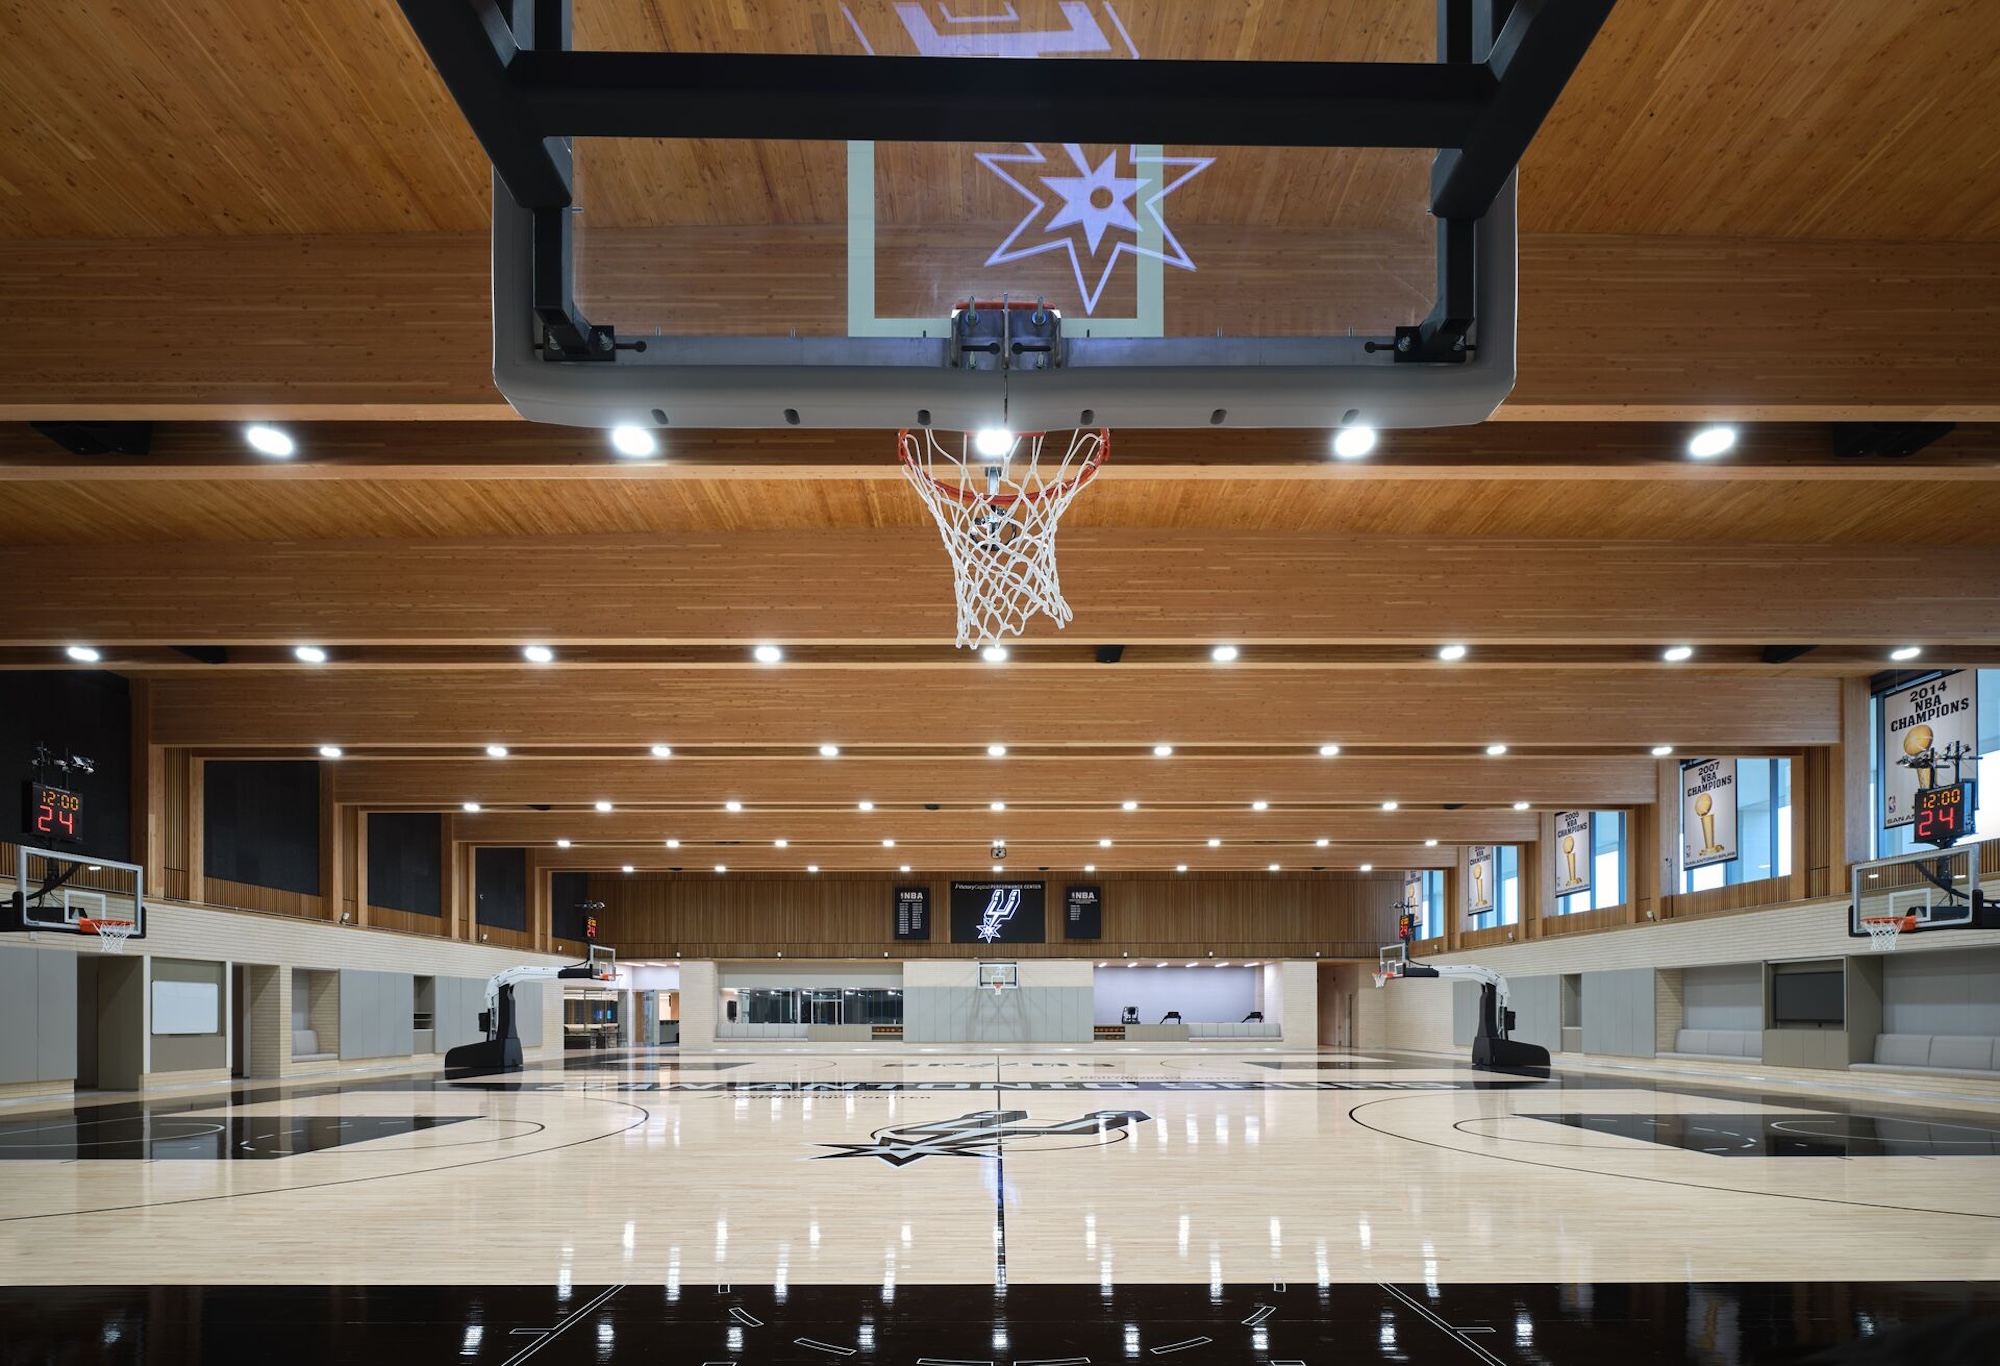 San Antonio Spurs’ new practice facility aims to help players win championships and maintain well-being